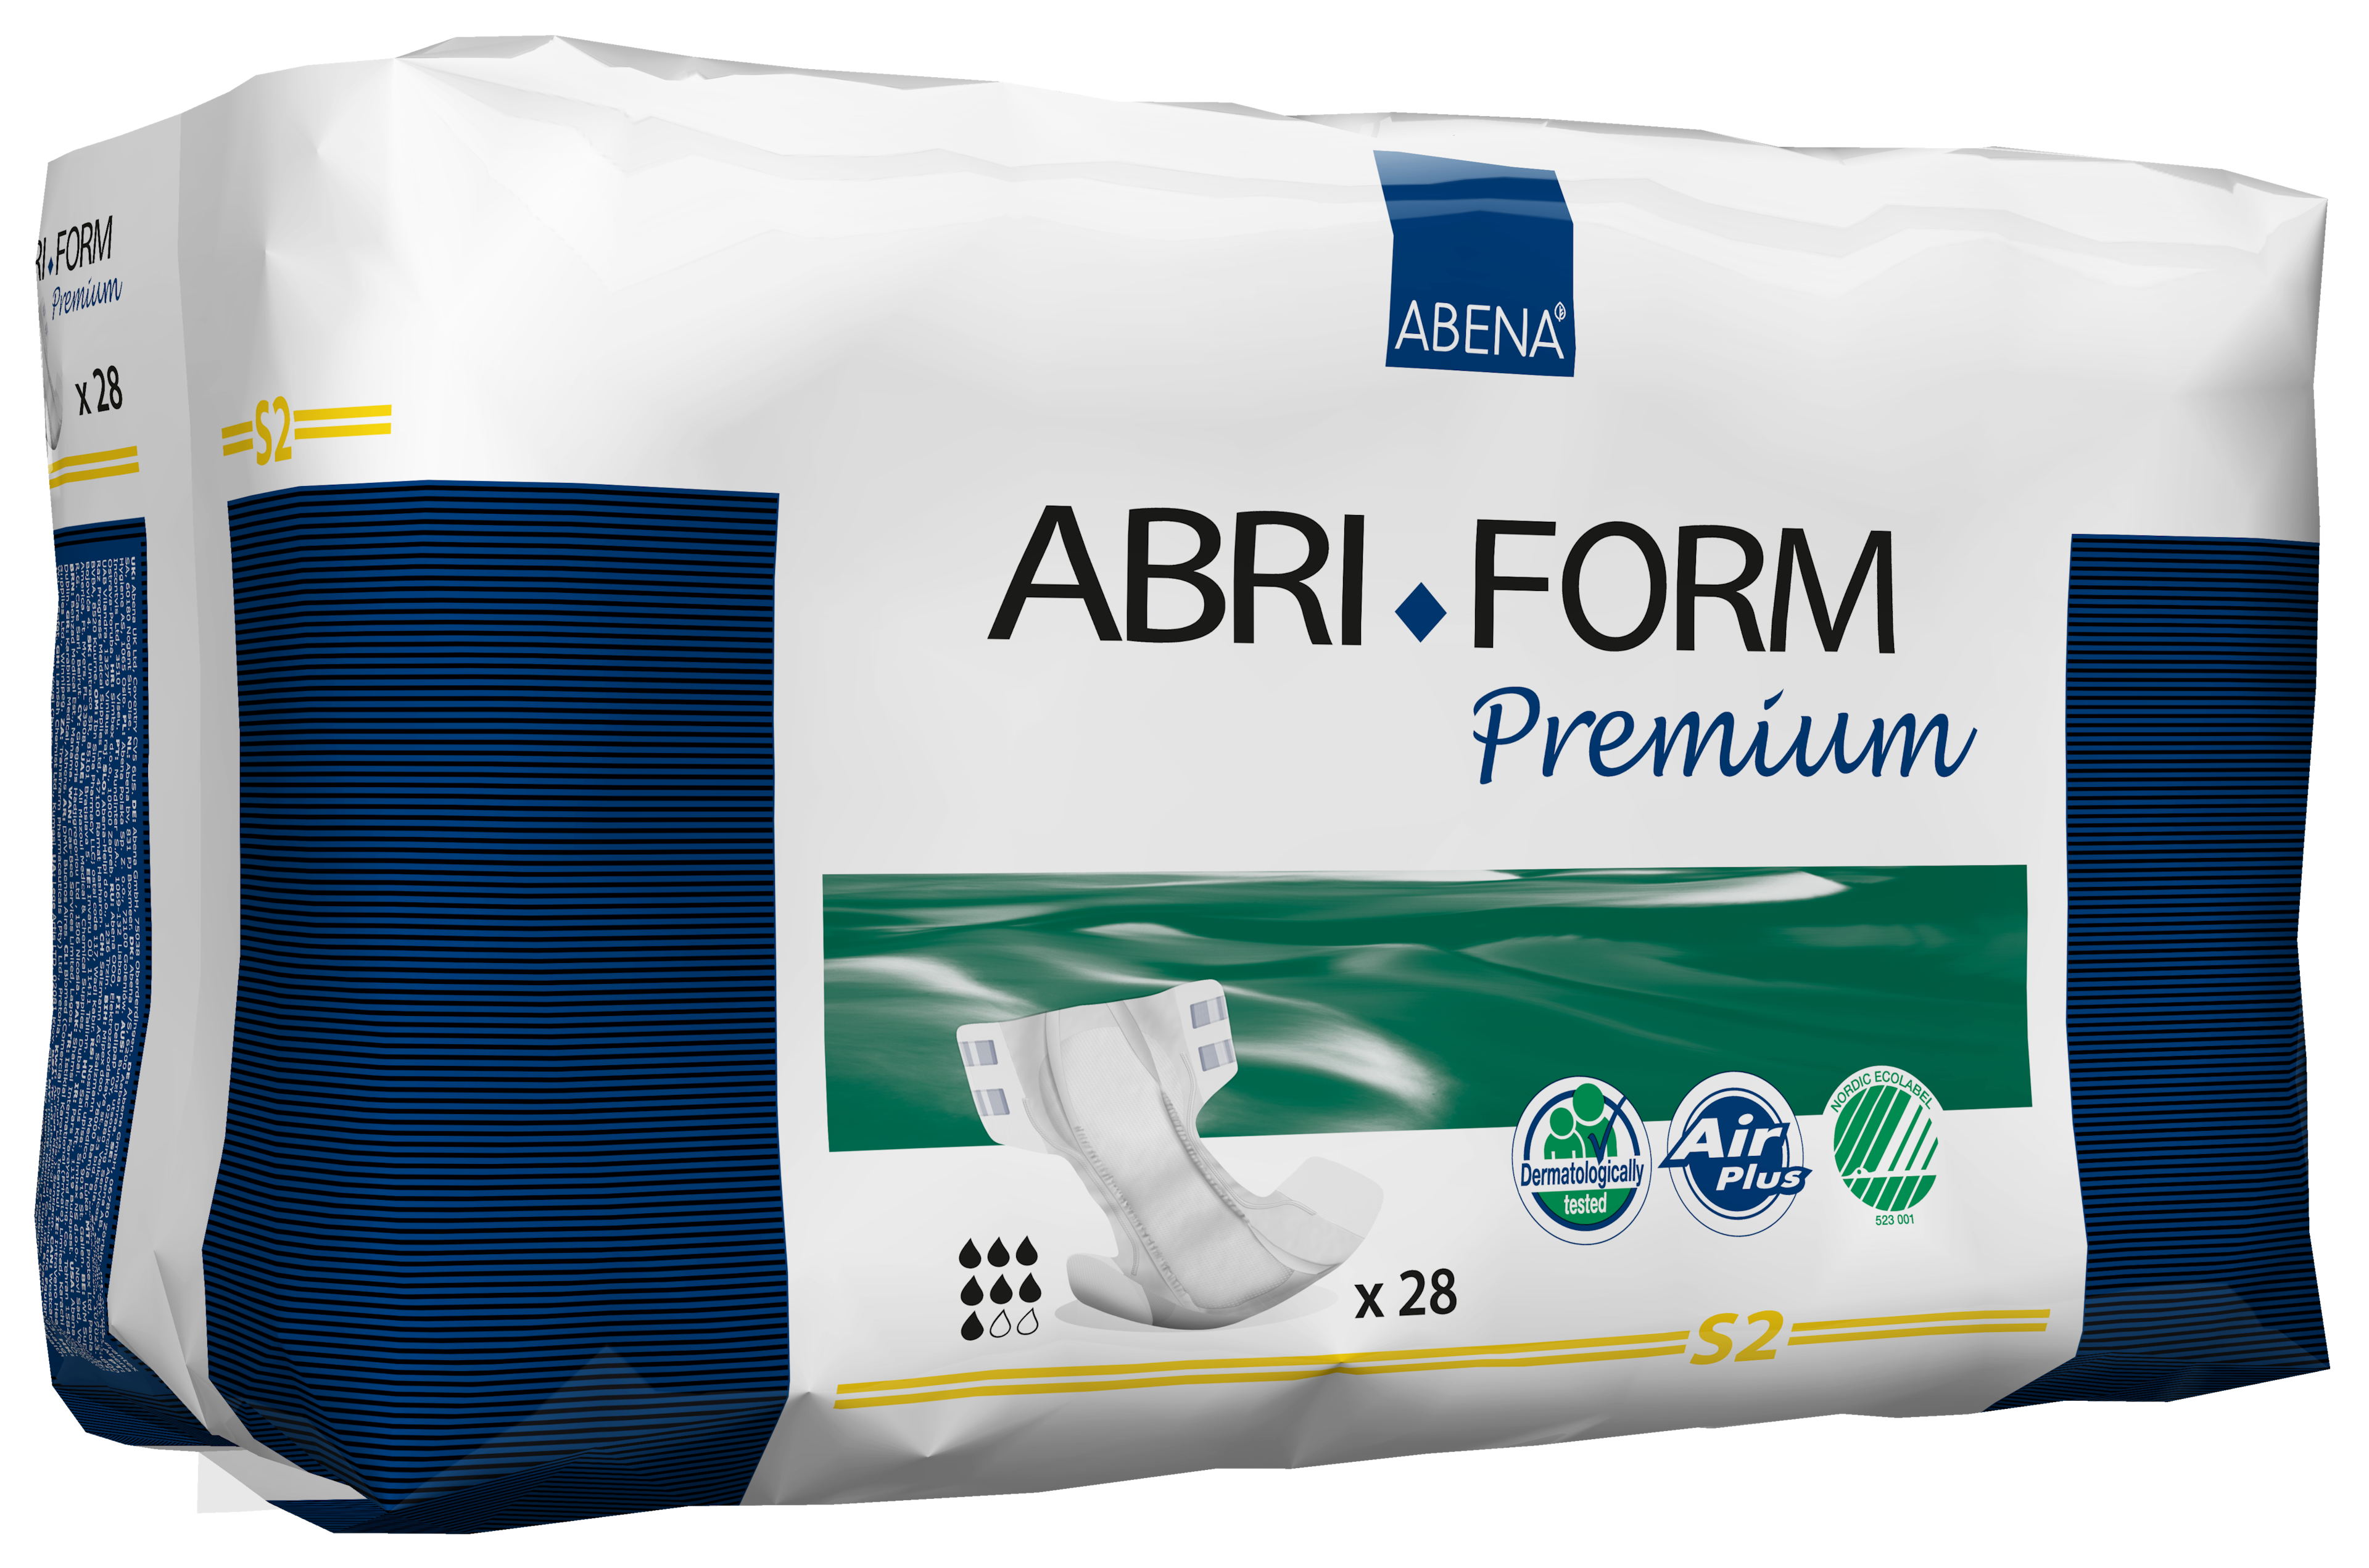 Abena Abri-Form Premium Adult Diapers with Tabs, S2